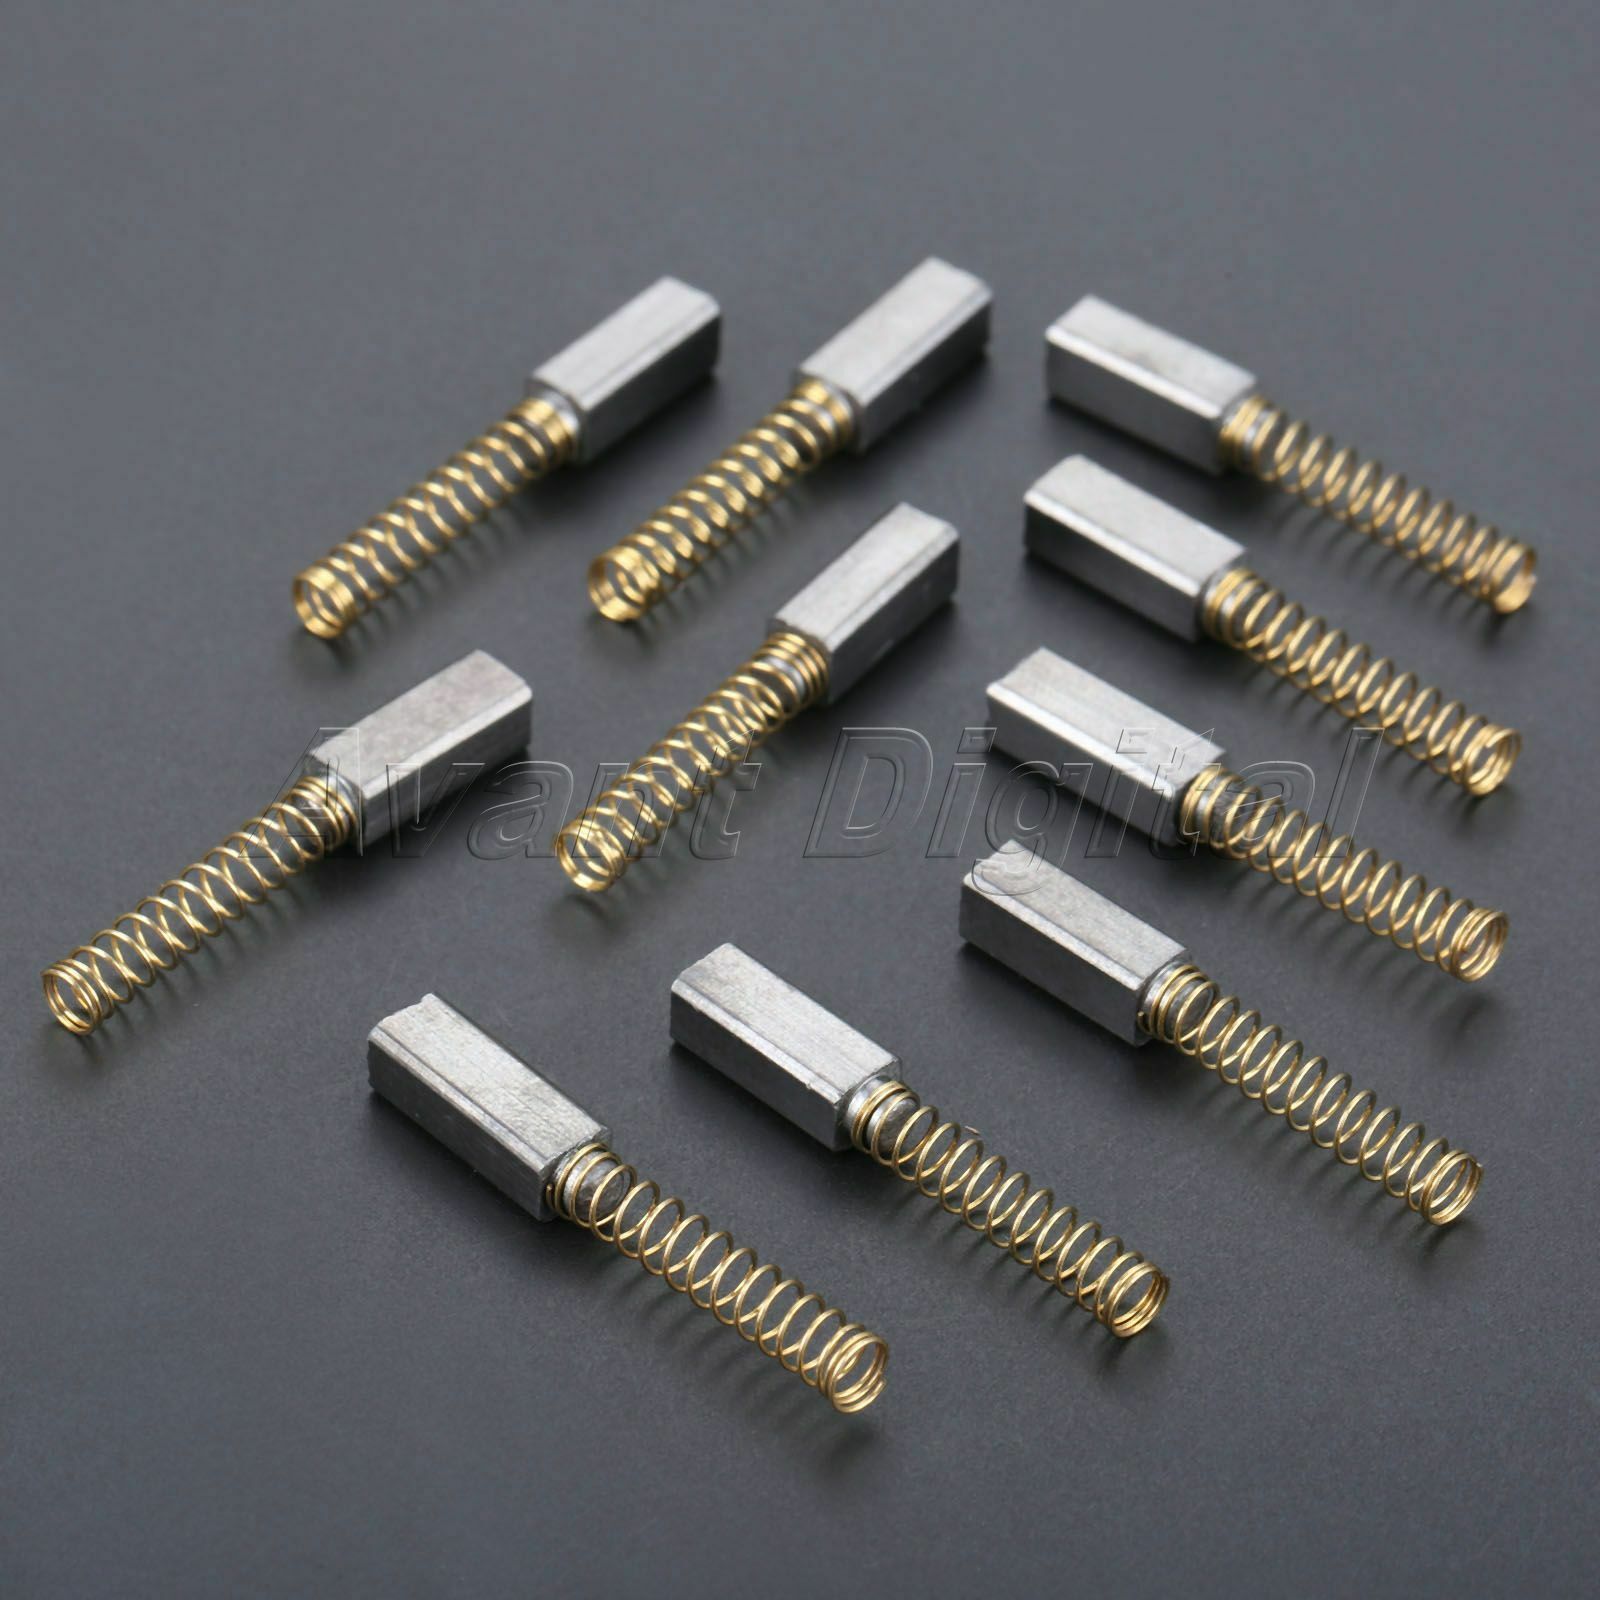 10Pcs Carbon Motor Brushes Graphite & Copper Wire Household Sewing Machine Parts